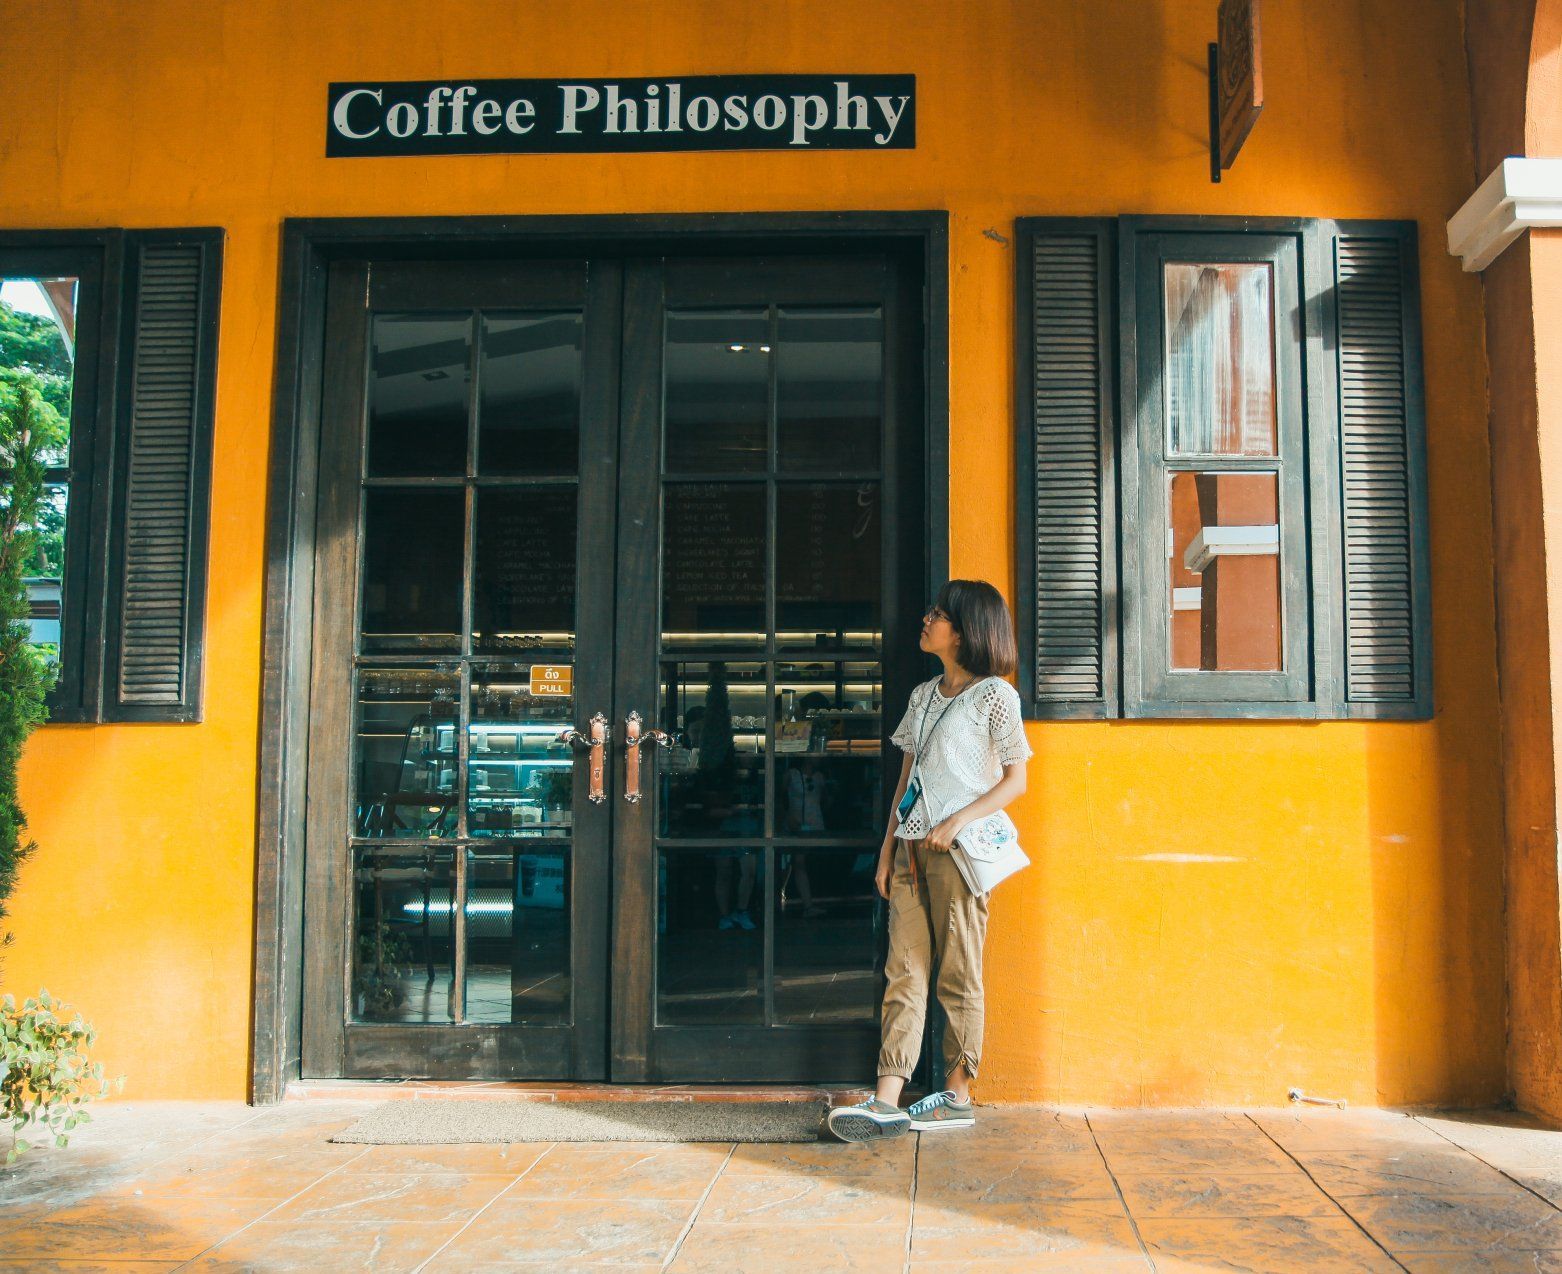 a woman stands in front of a coffee philosophy store